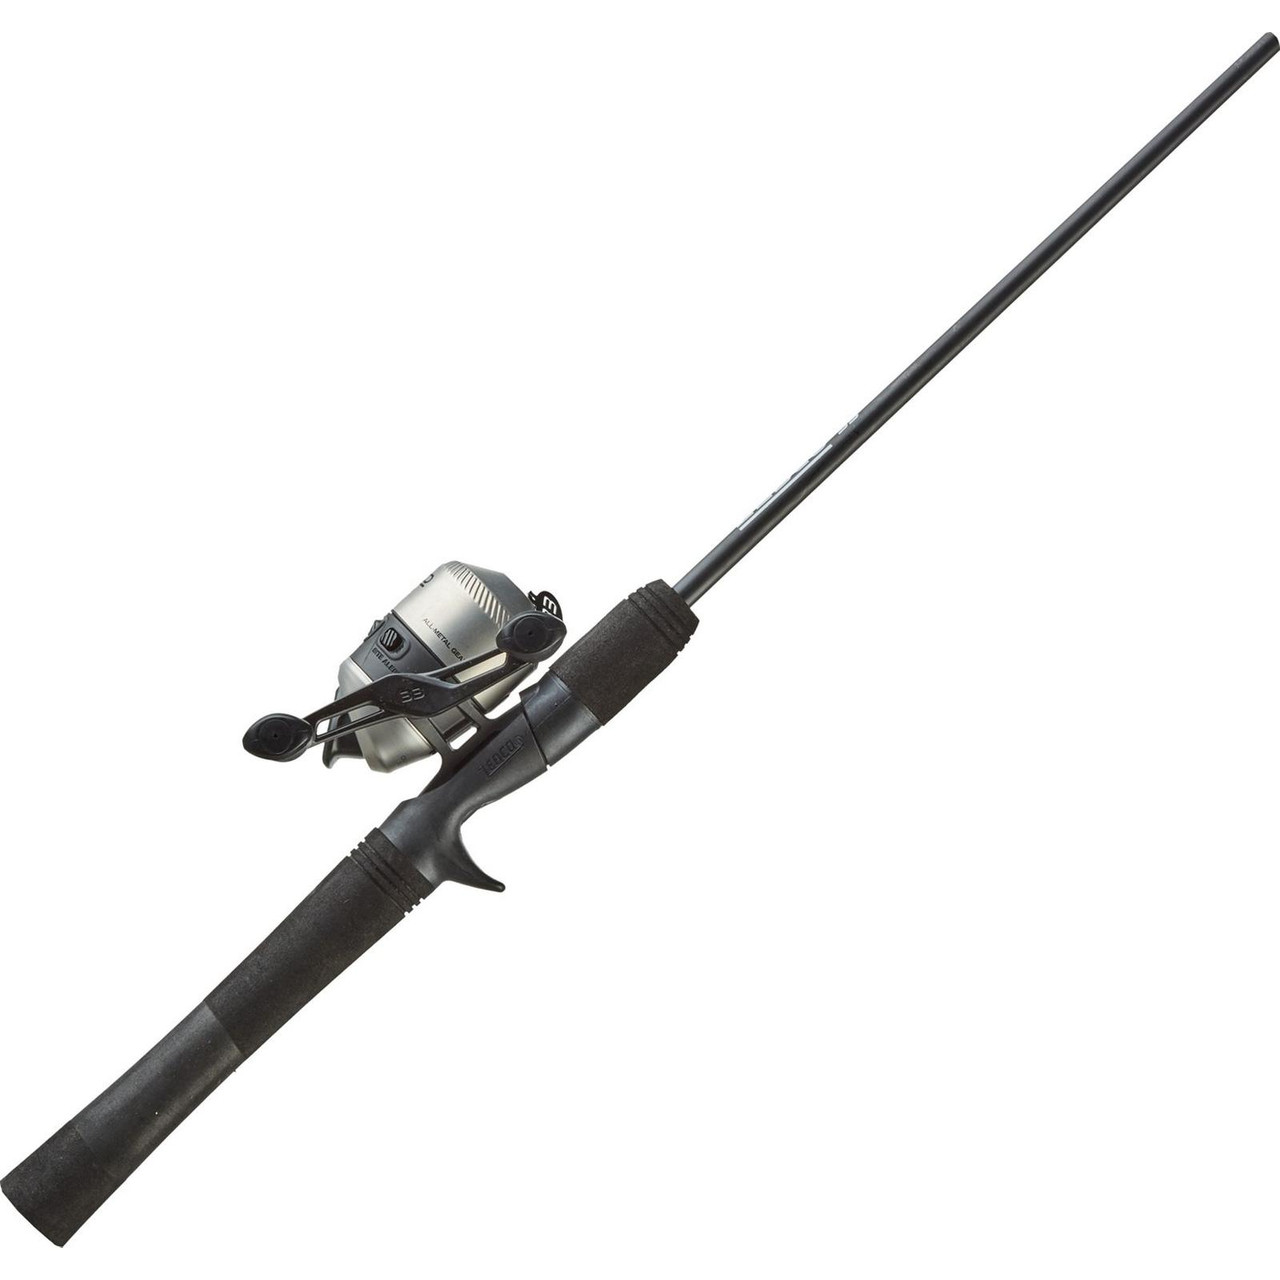 Zebco Micro 5 ft UL Freshwater Spincast Rod and Reel Combo - Fin